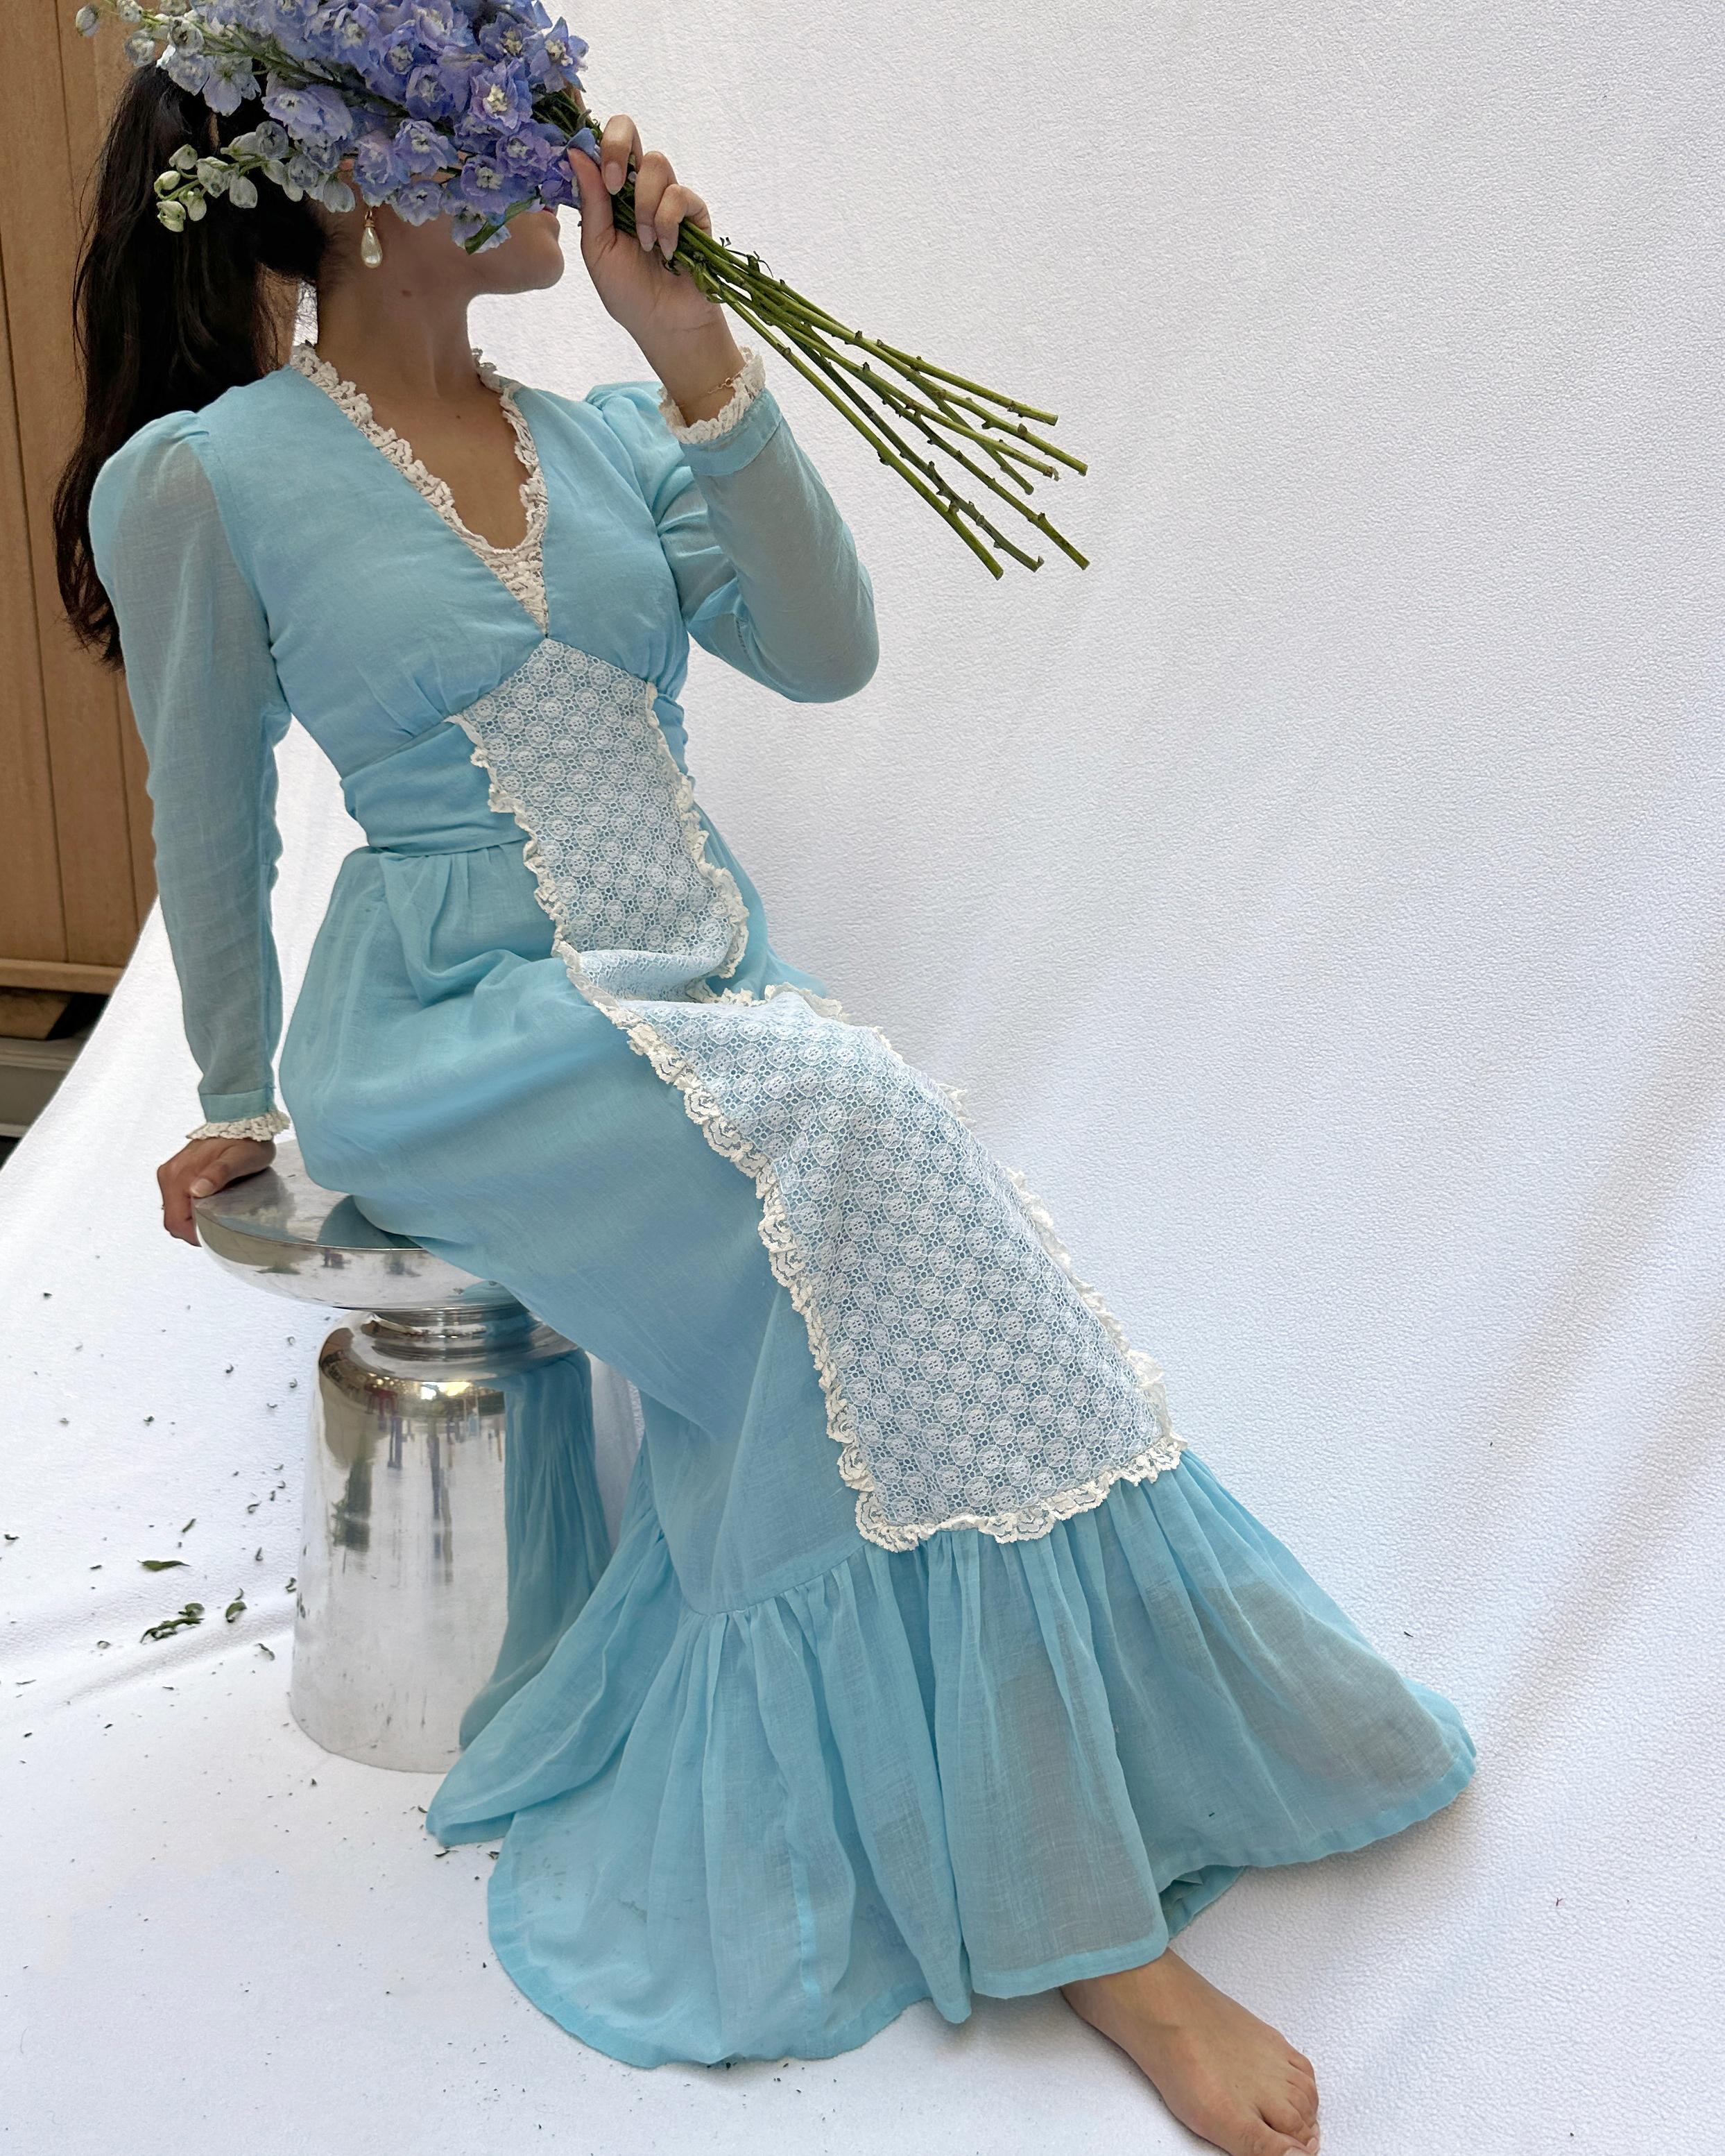 This vintage Gunne Sax style dress is so 1970s-does-Victorian. The blue color is just a dream! It features lace overlay down the front, a flounce at the hem, and lace trim throughout. The empire waist features a ribbon belt that ties in the back in